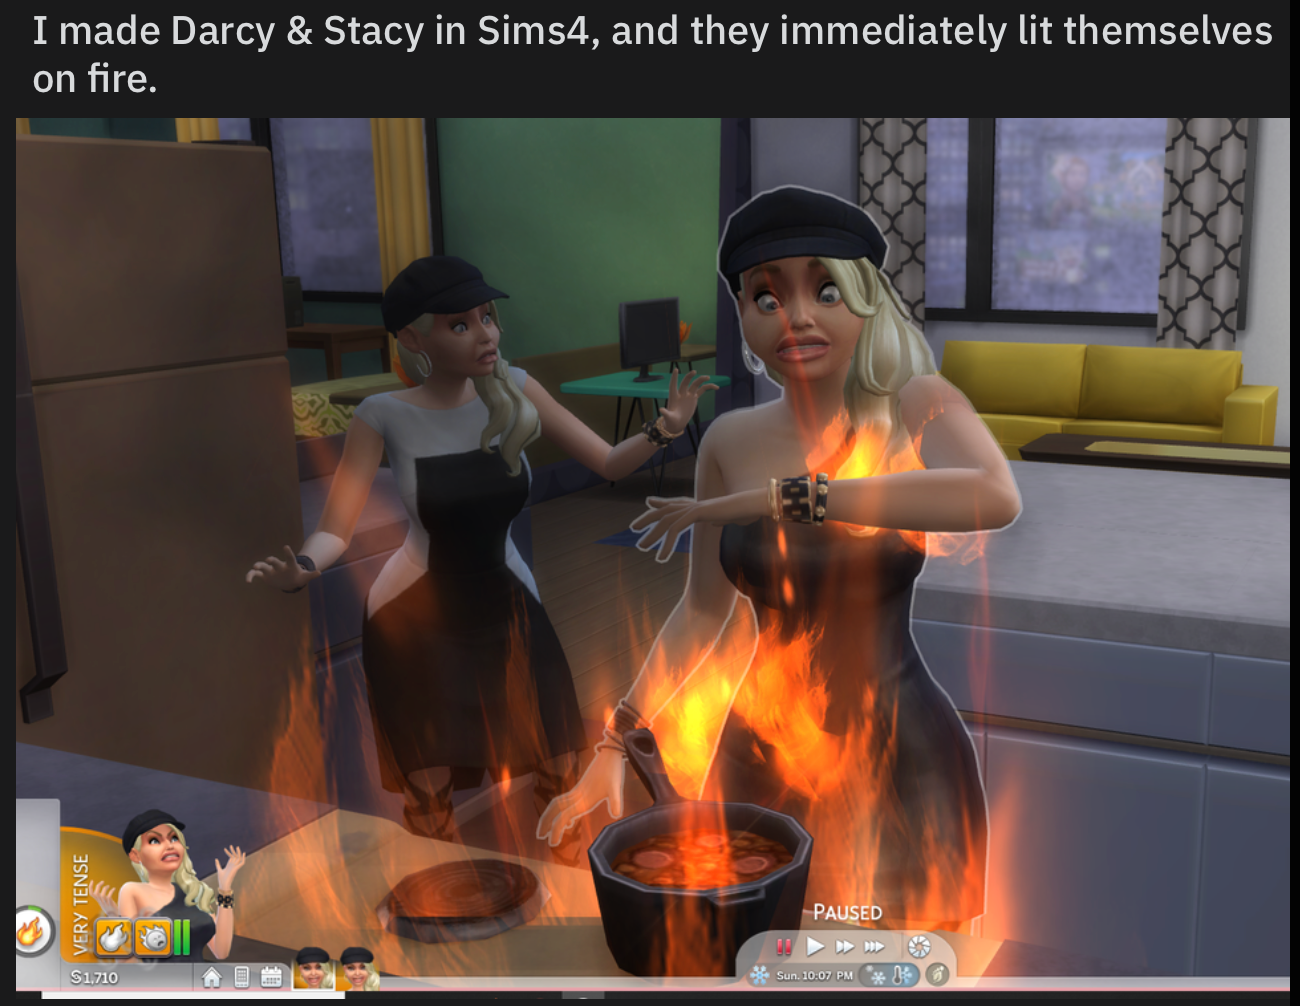 Darcey and Stacey of 90 Day Fiancé as Sims characters catch fire from a stove